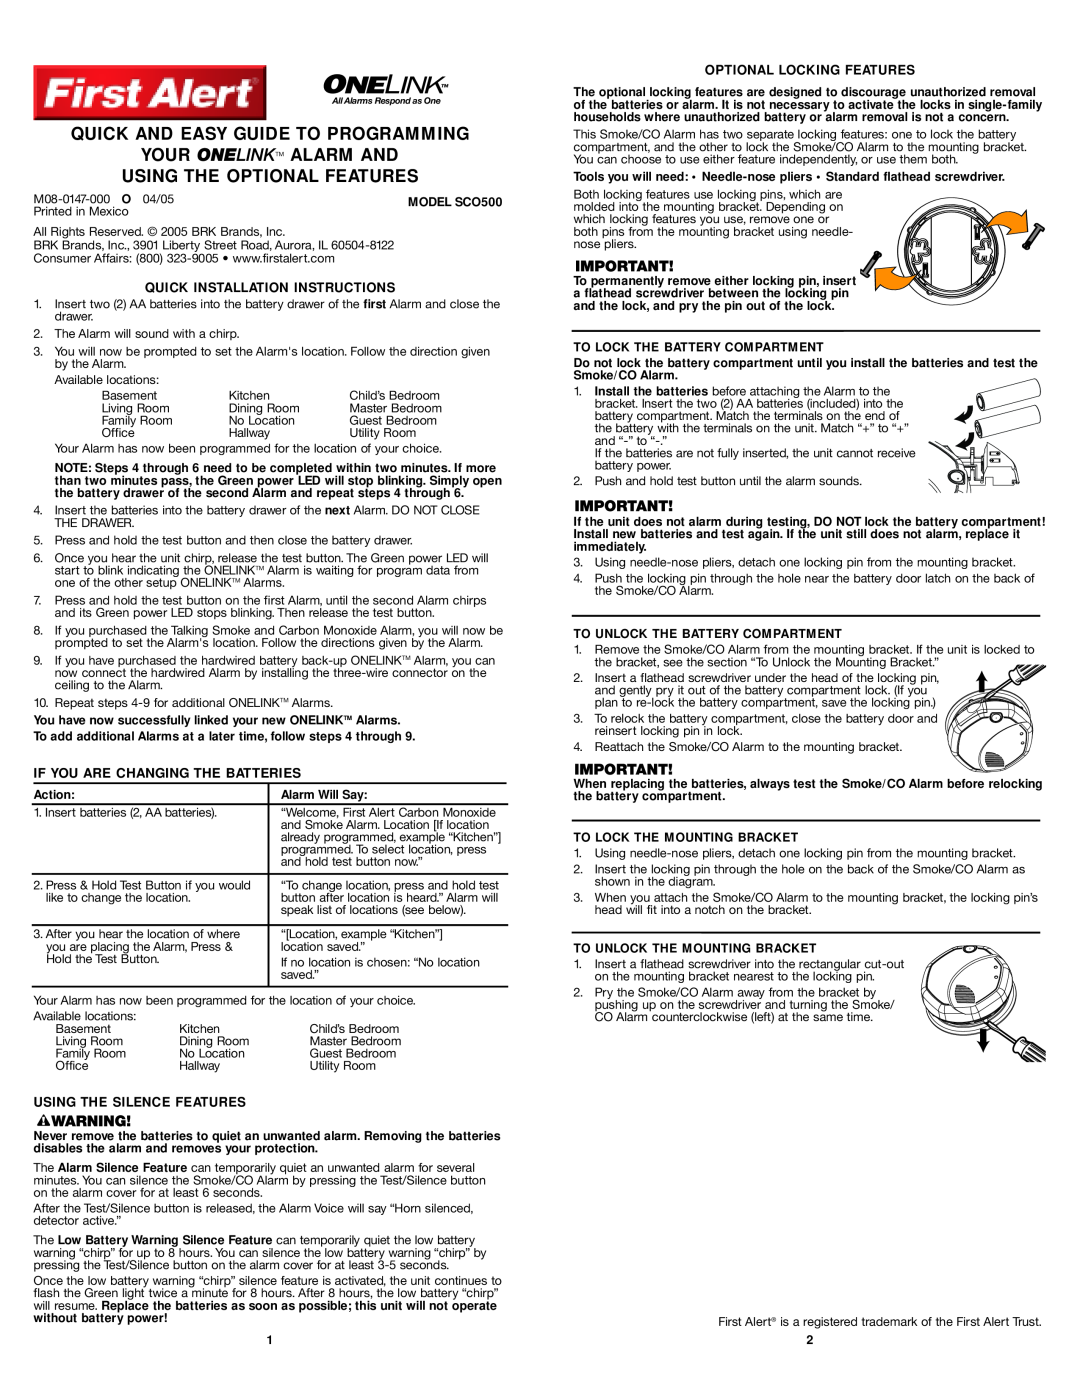 BRK electronic SCO500 user manual Quick And Easy Guide To Programming Your Onelinktm Alarm And, Using The Optional Features 